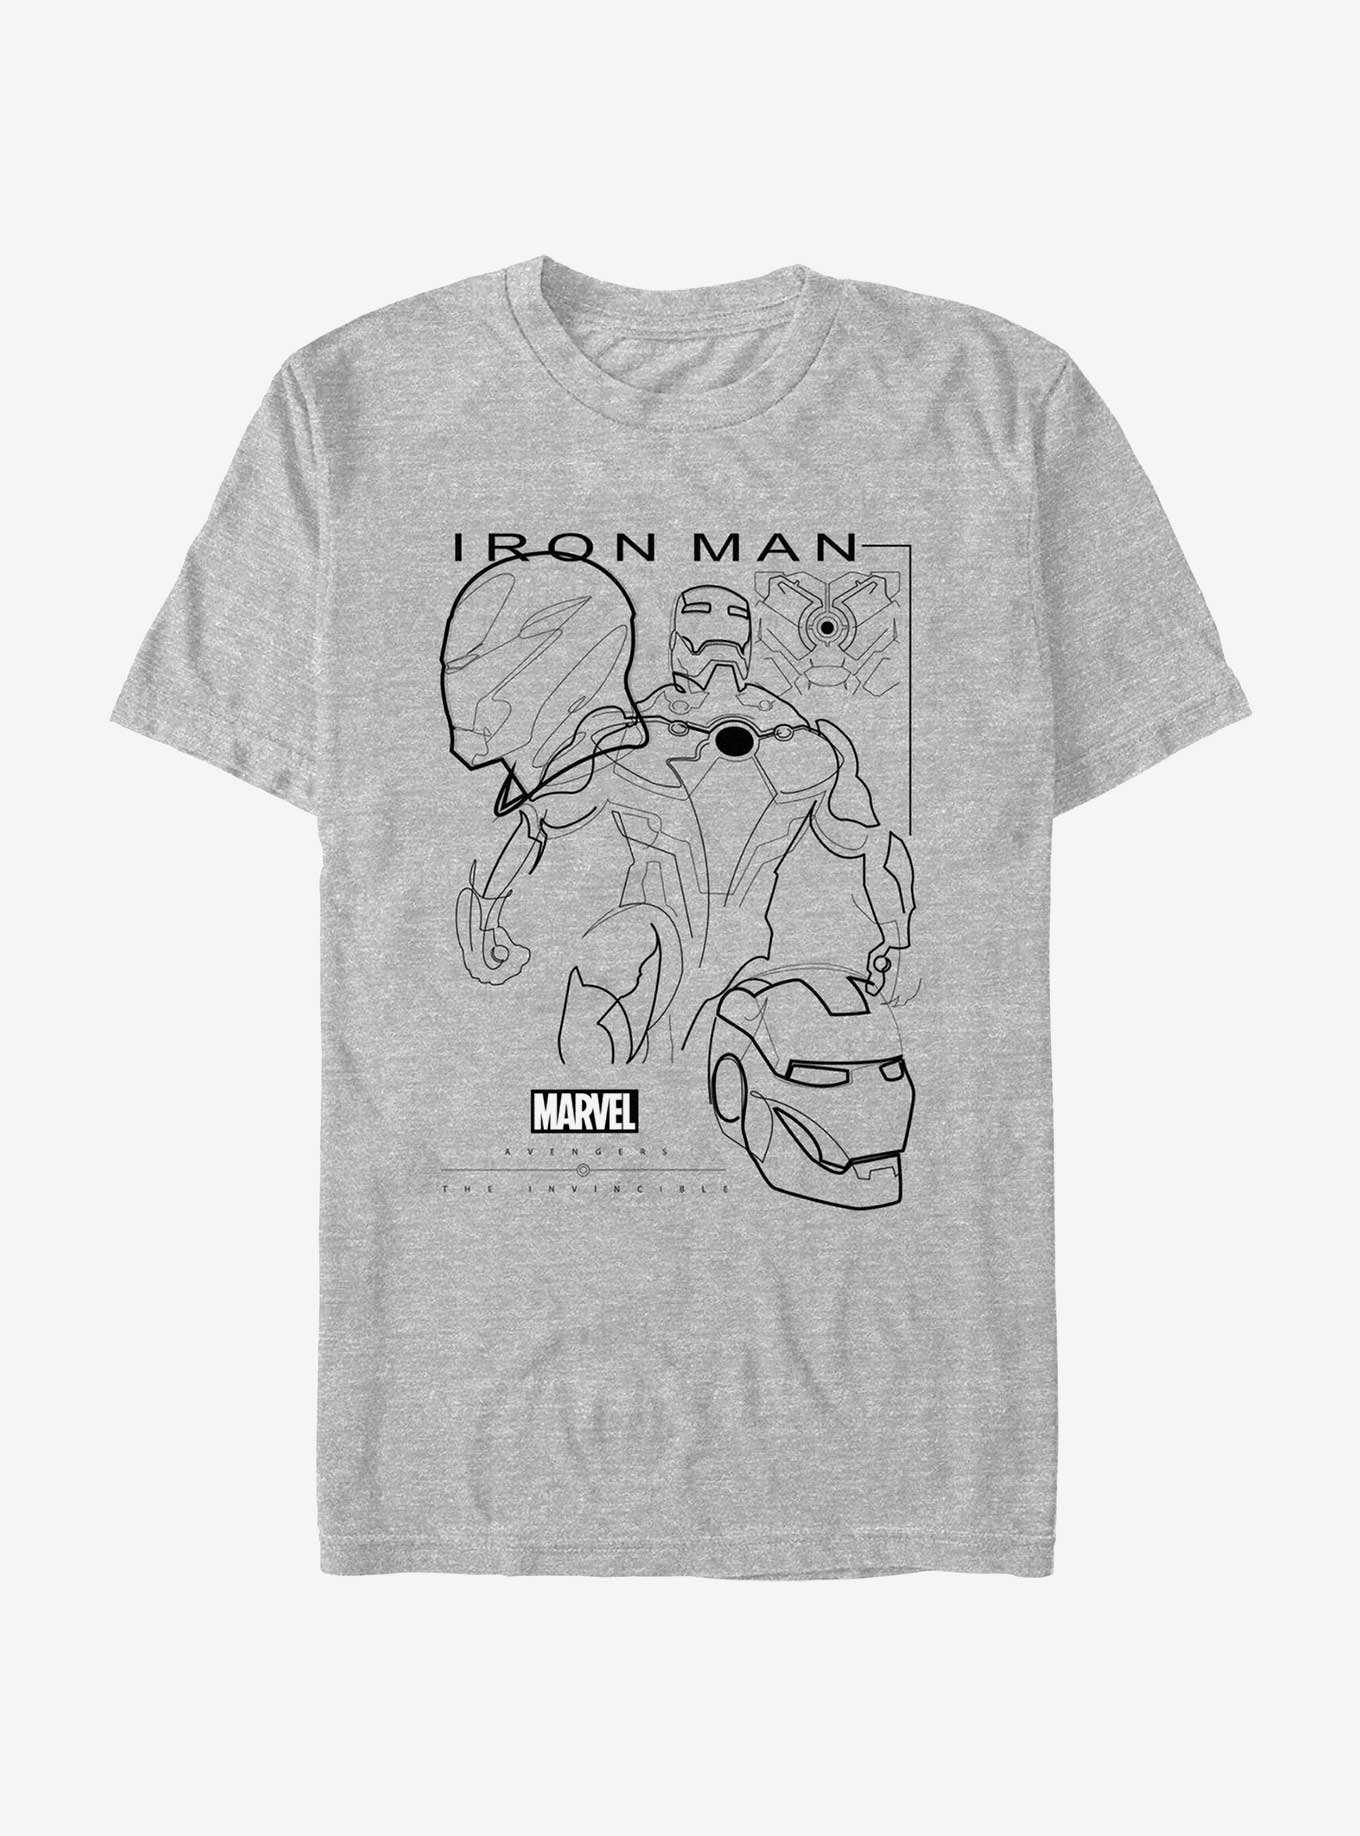 Hot & T-Shirts | Man Iron Topic OFFICIAL Merchandise